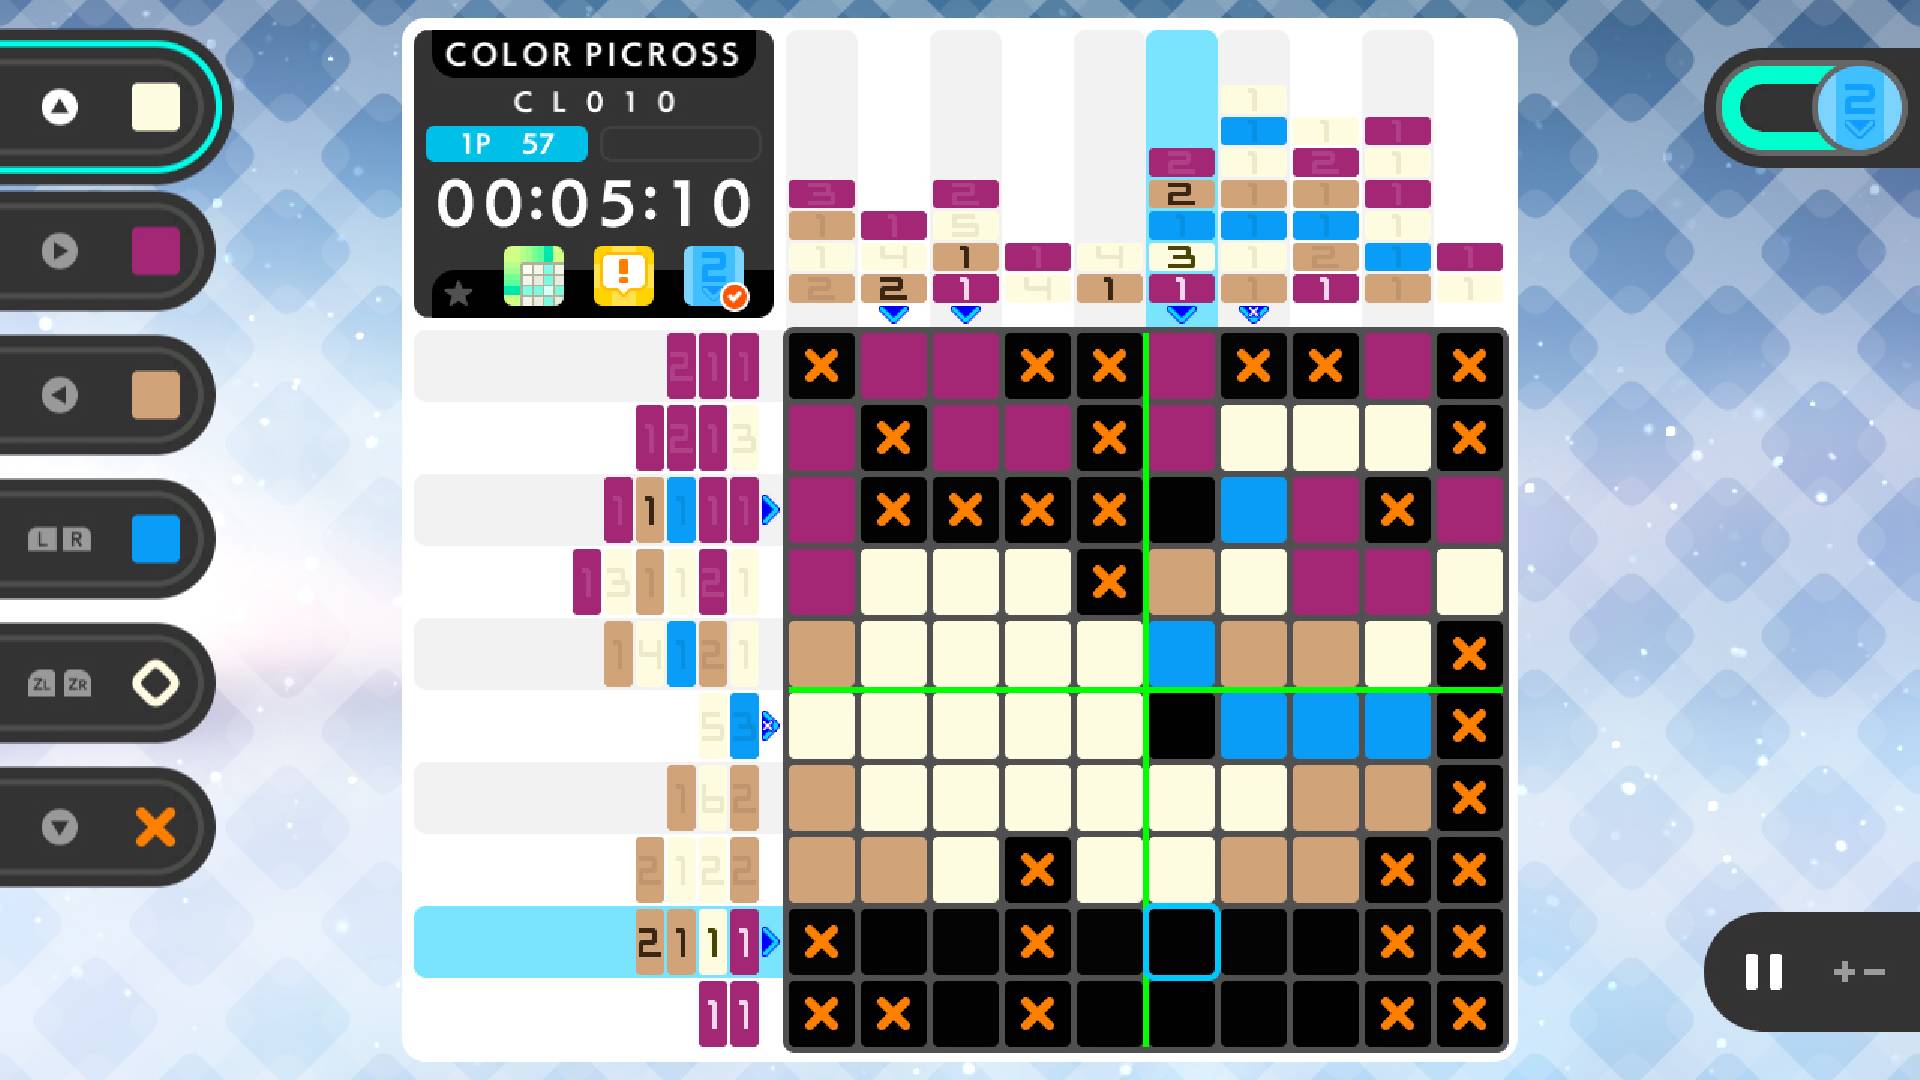 A game of Picross is shown with a large grid and numbers on either side